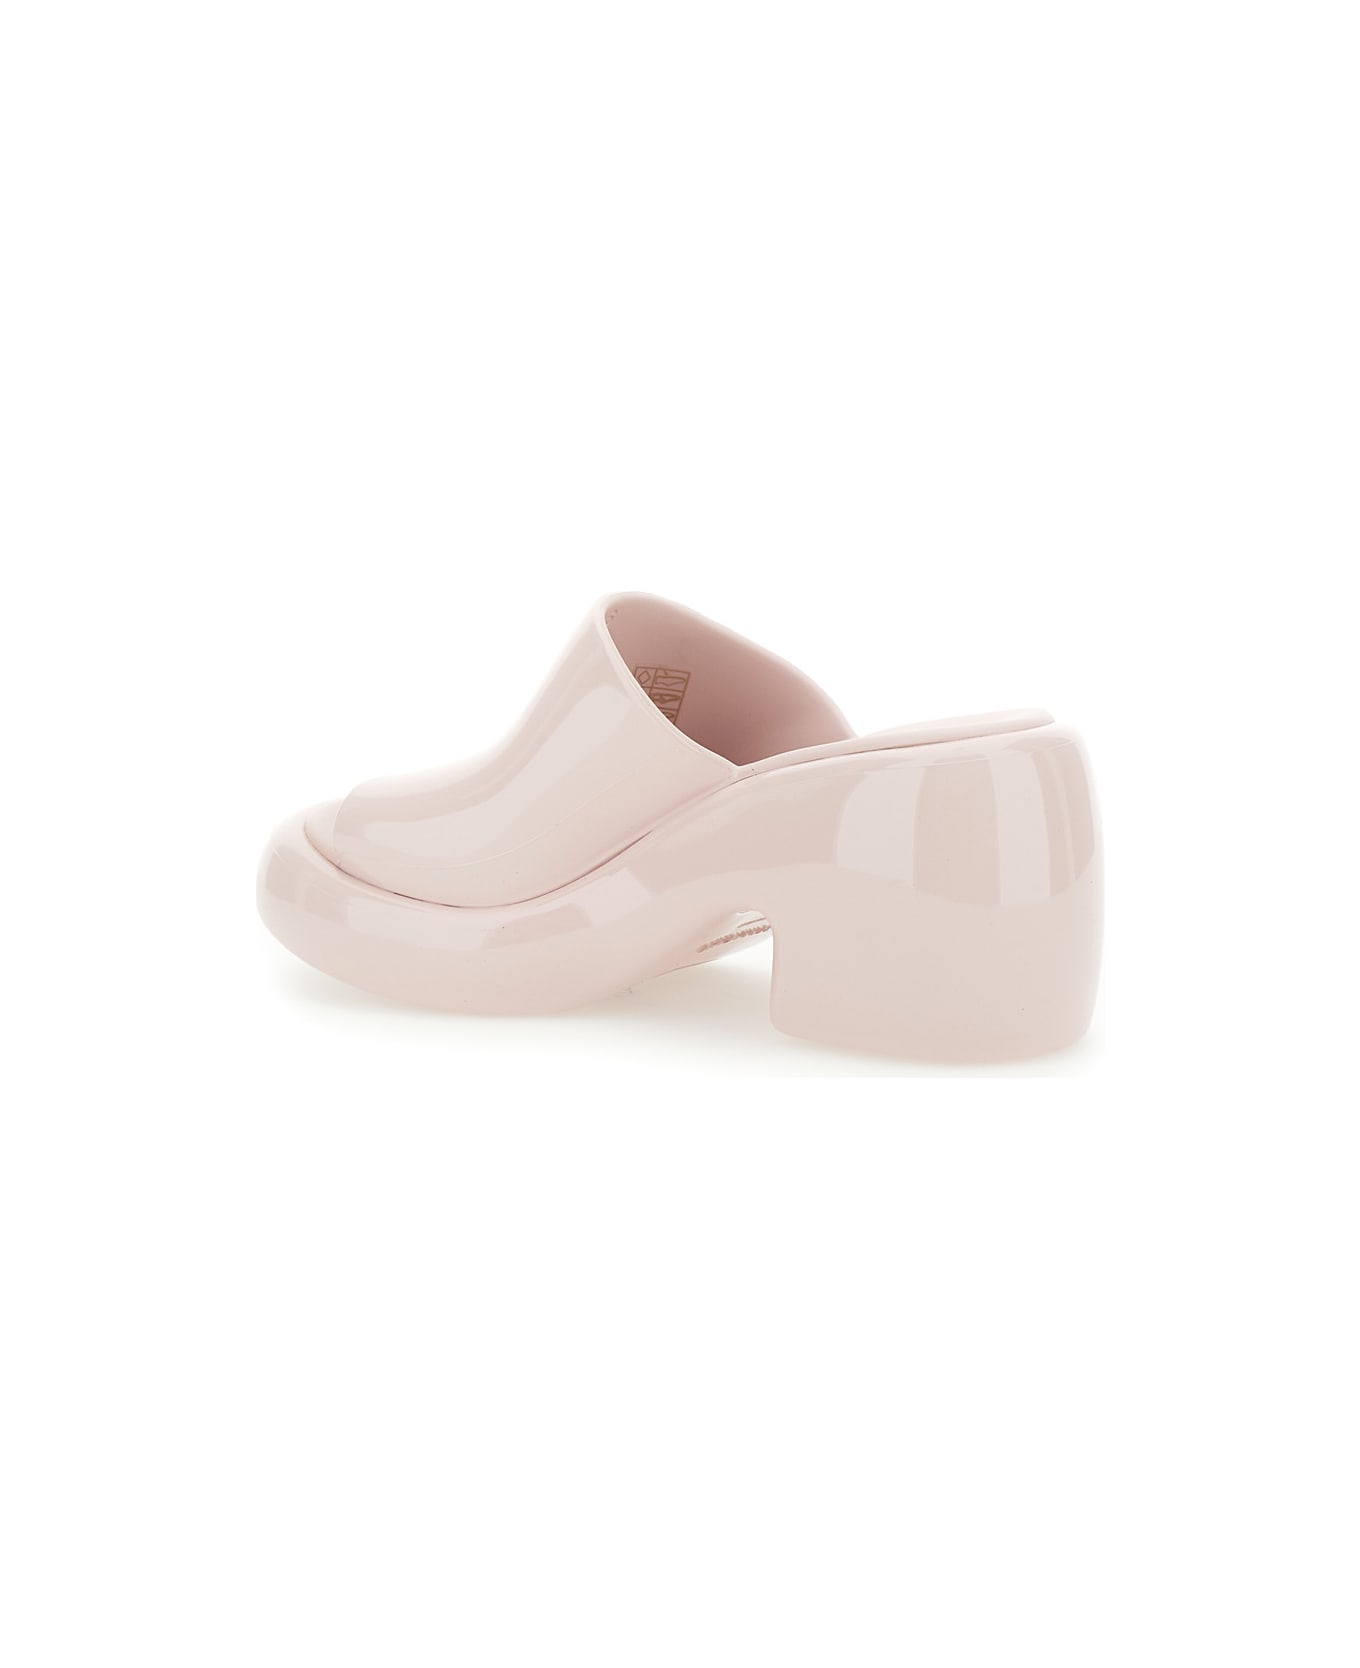 Ferragamo Pink Slide Sandals With Chunky Heel In Rubber Woman - Pink サンダル